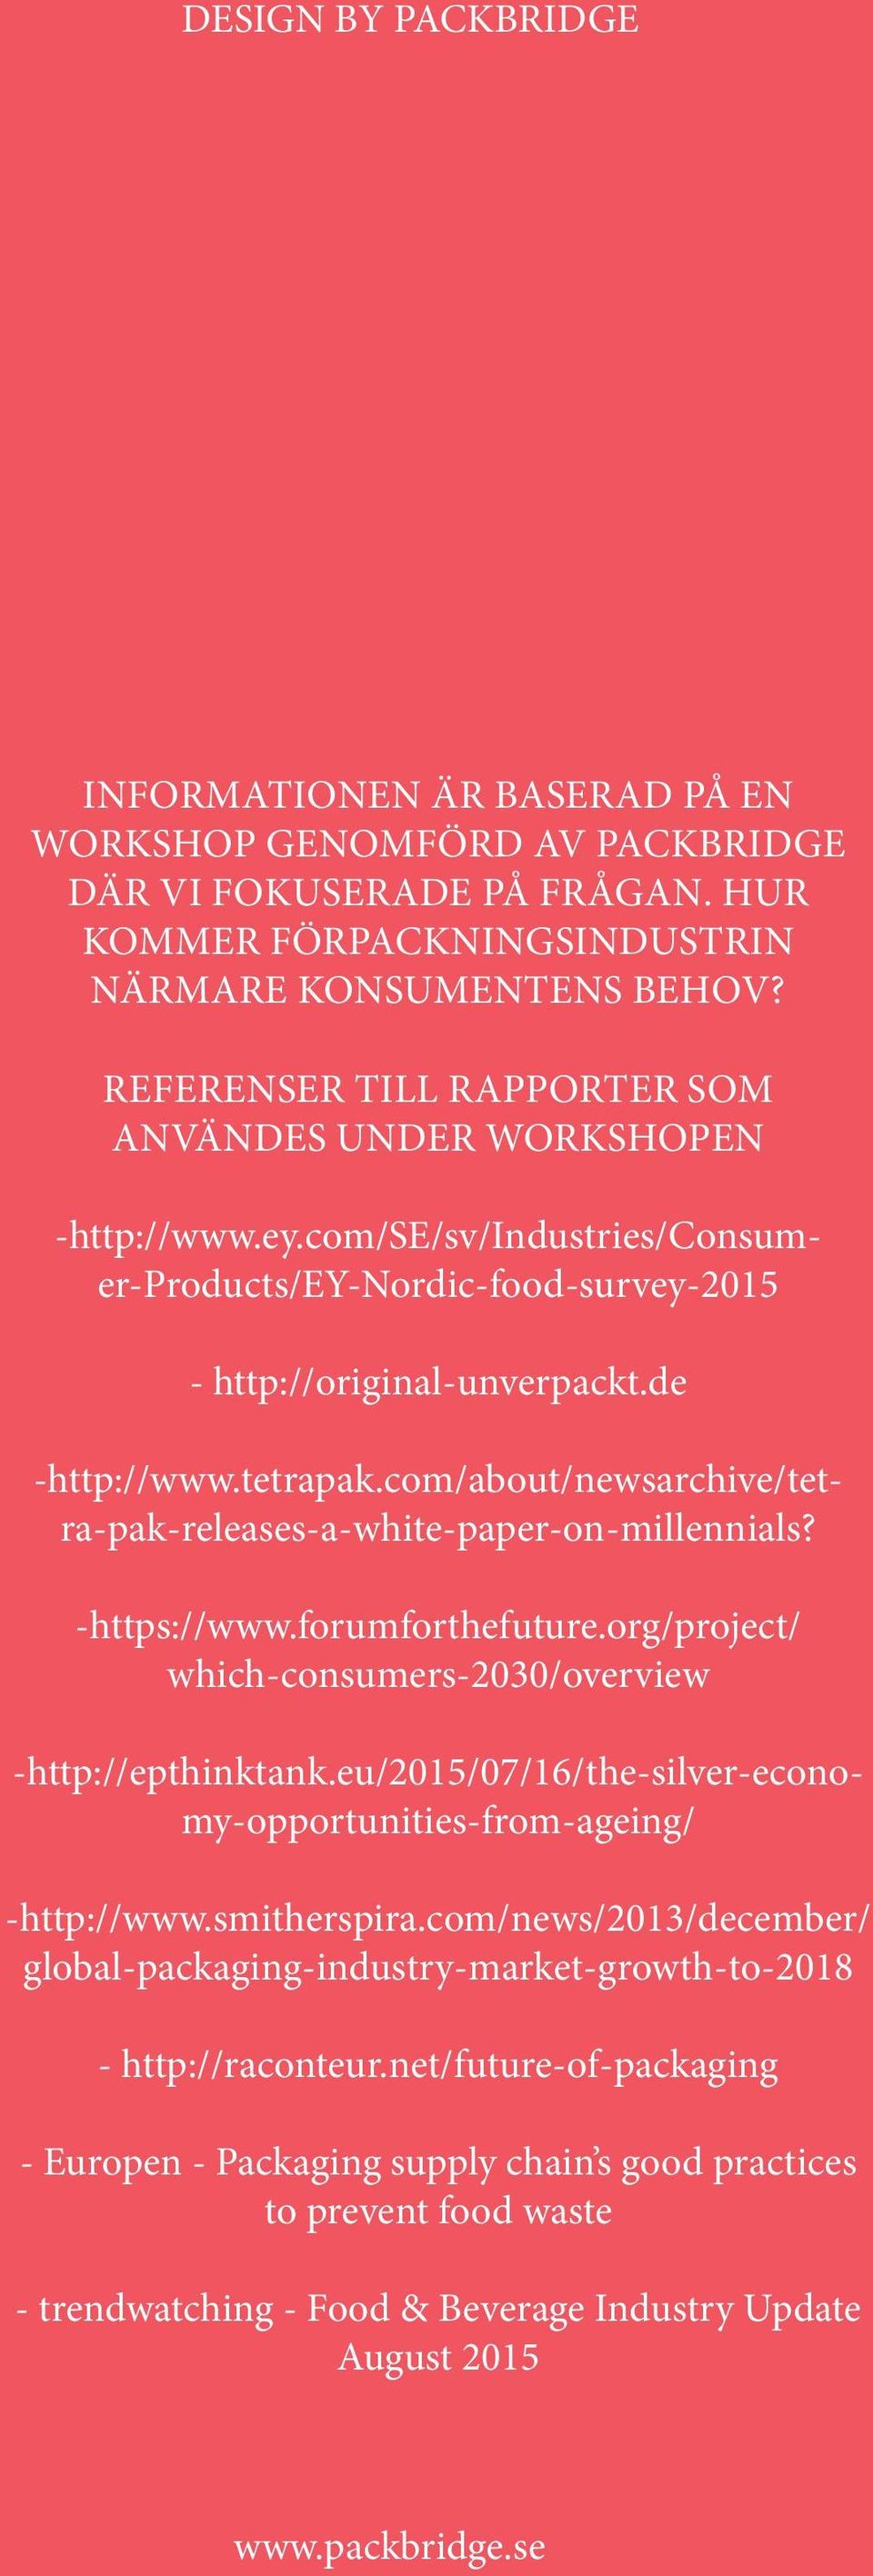 com/se/sv/industries/consumer-products/ey-nordic-food-survey-2015 -http://www.tetrapak.com/about/newsarchive/tetra-pak-releases-a-white-paper-on-millennials? -http://epthinktank.